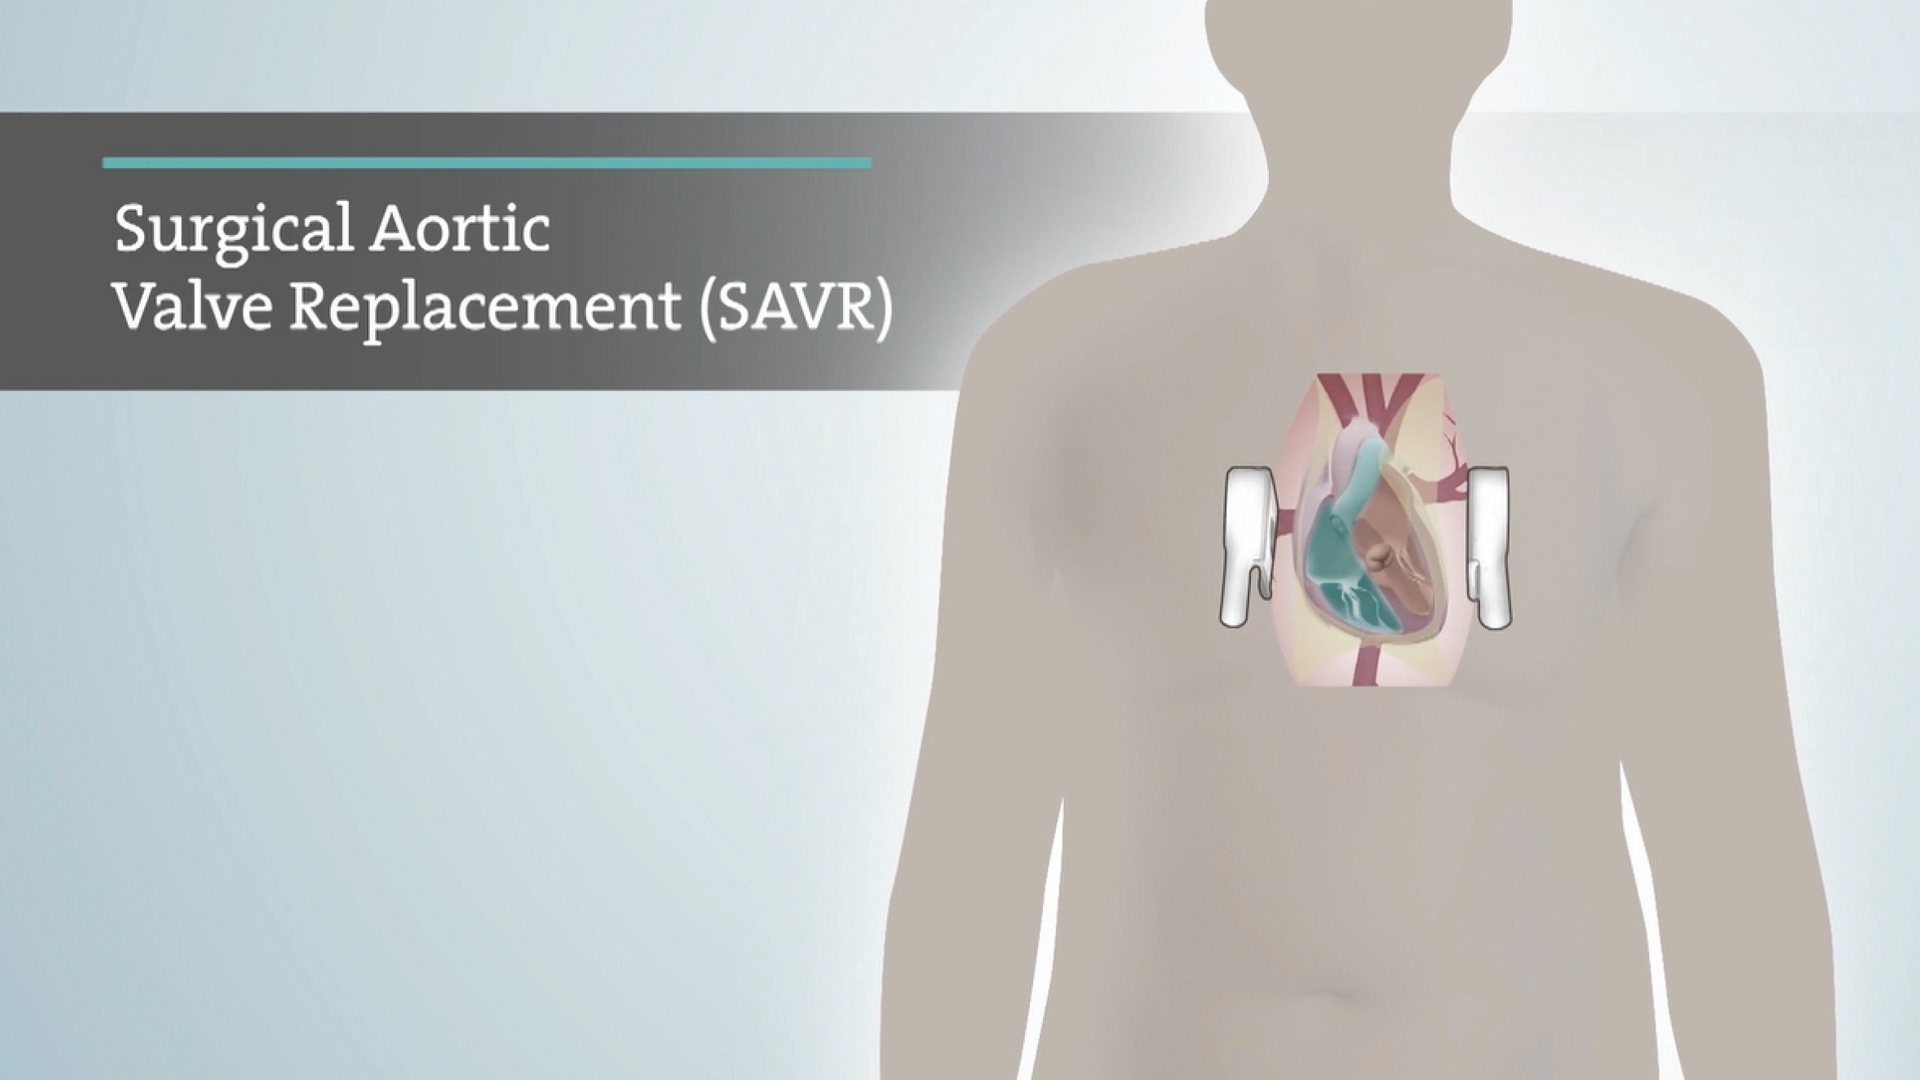 Surgical Aortic Valve Replacement (SAVR)